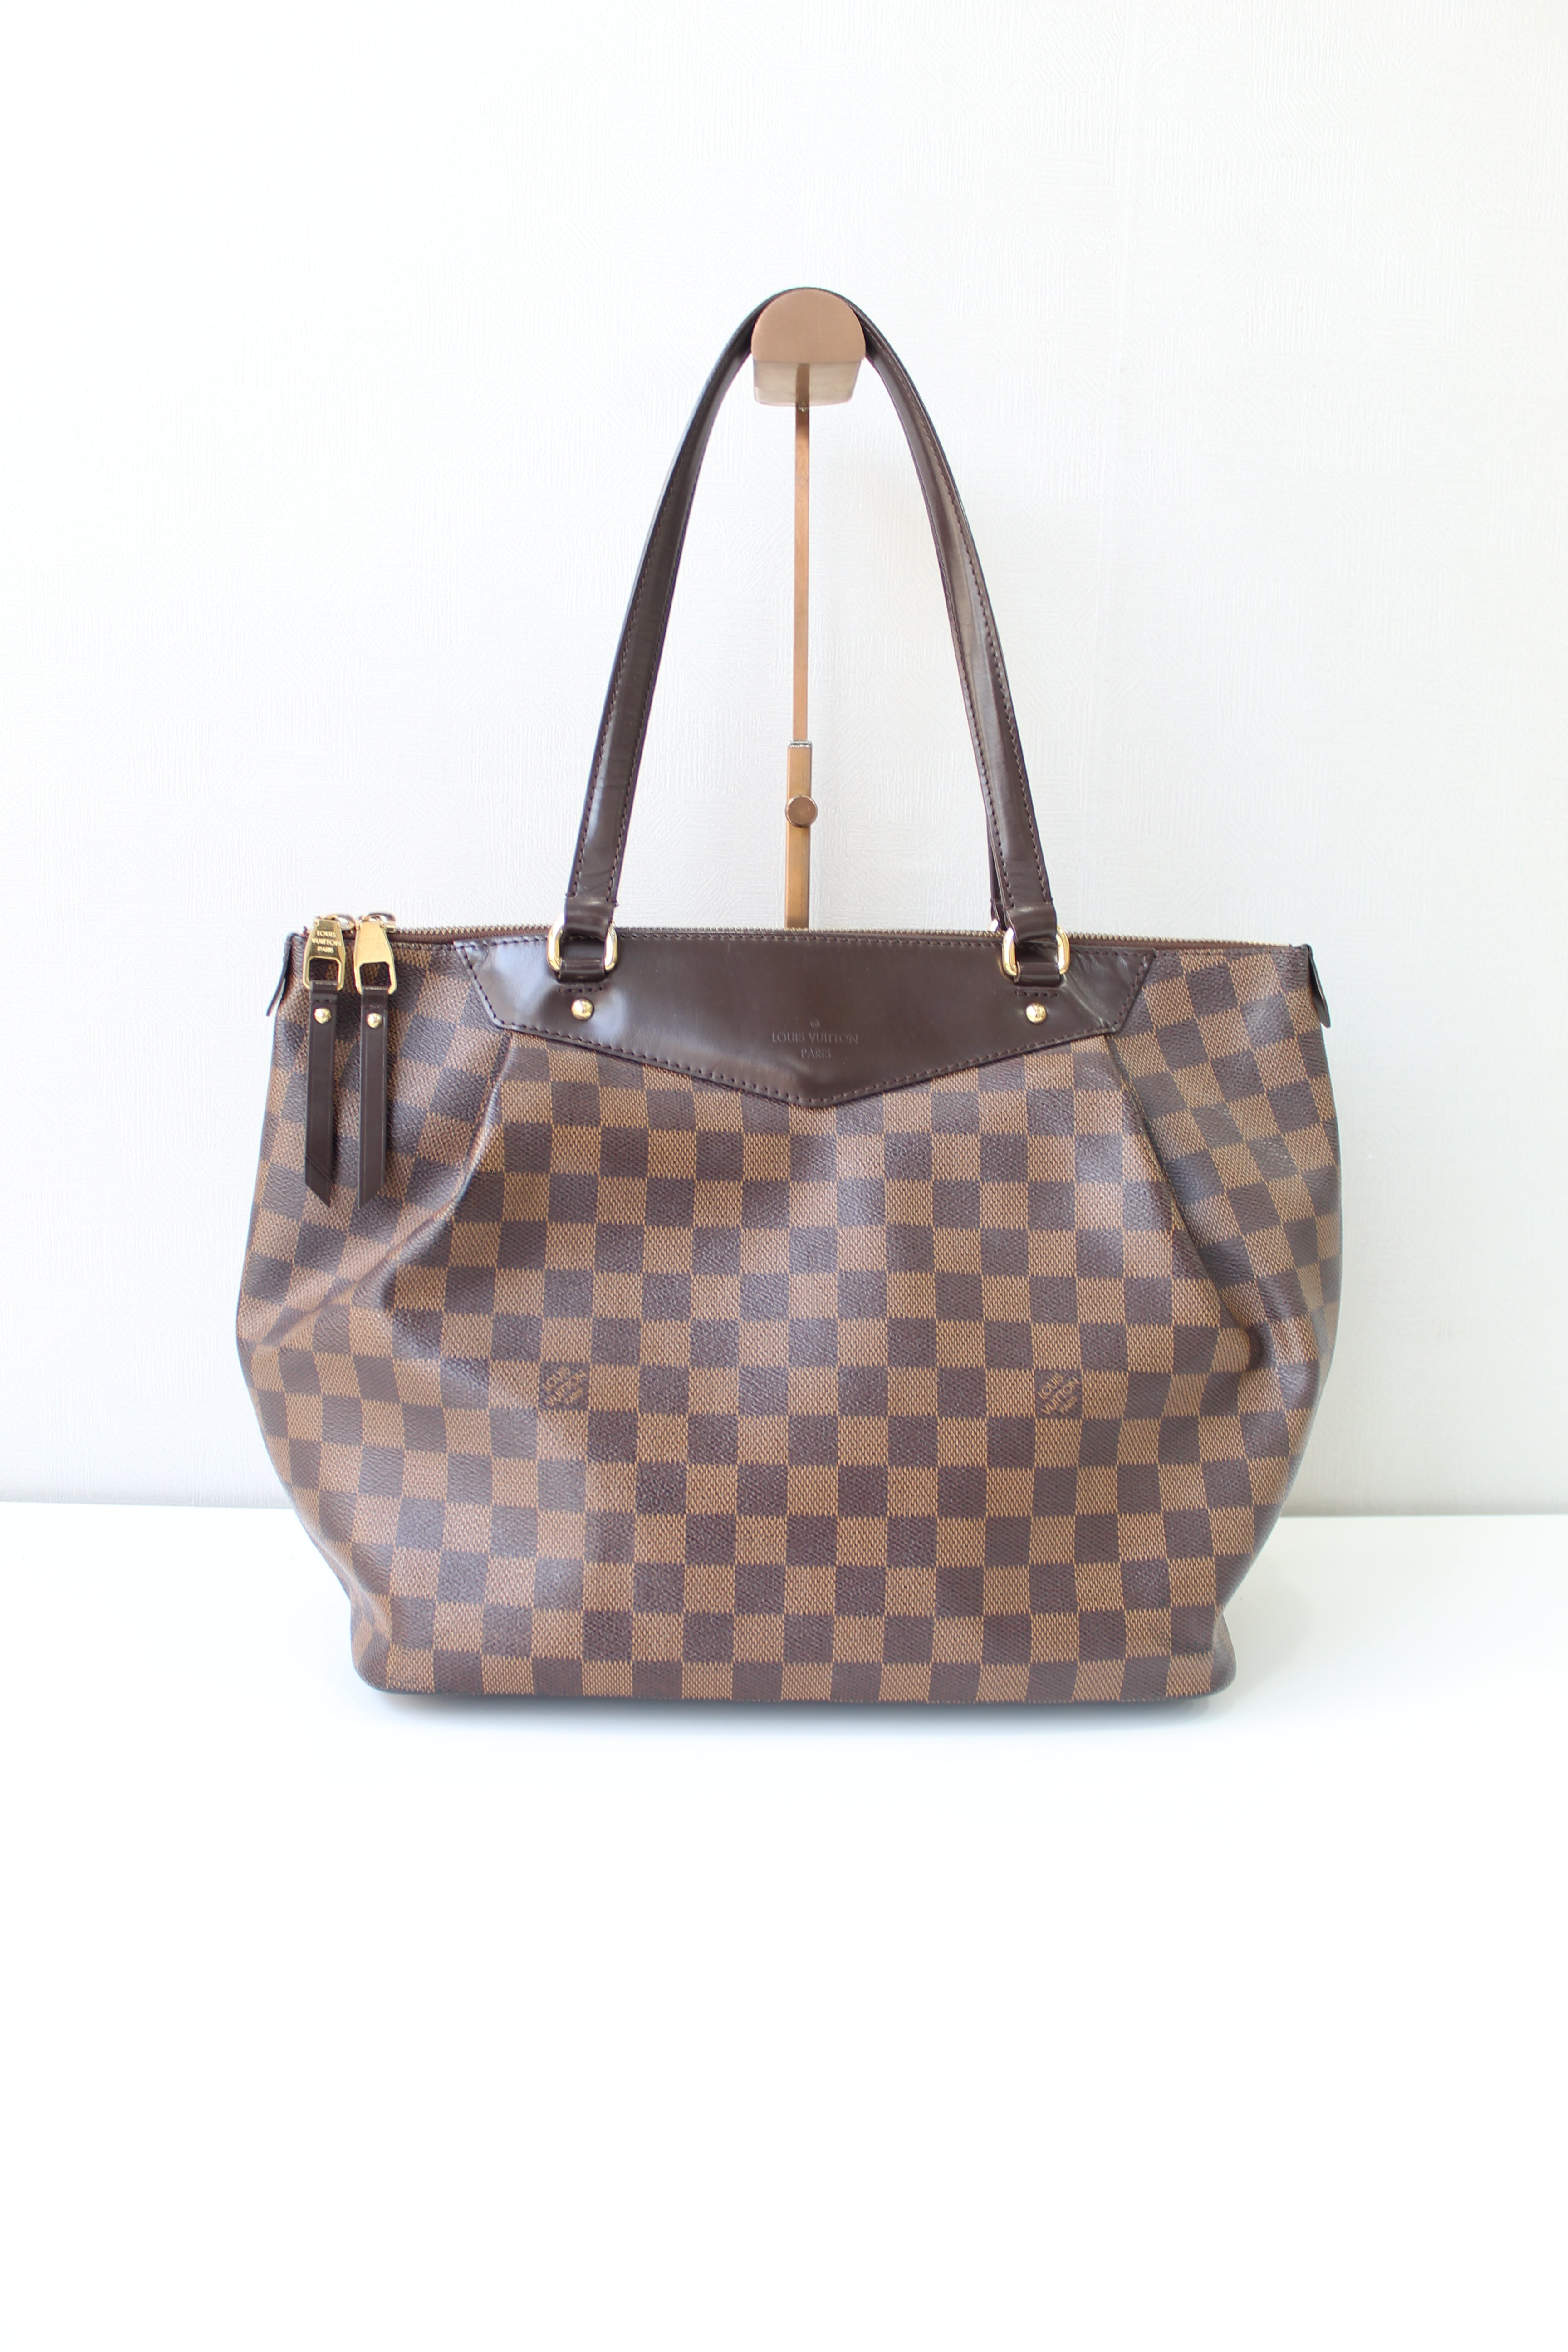 Louis Vuitton Westminster Pm Hand